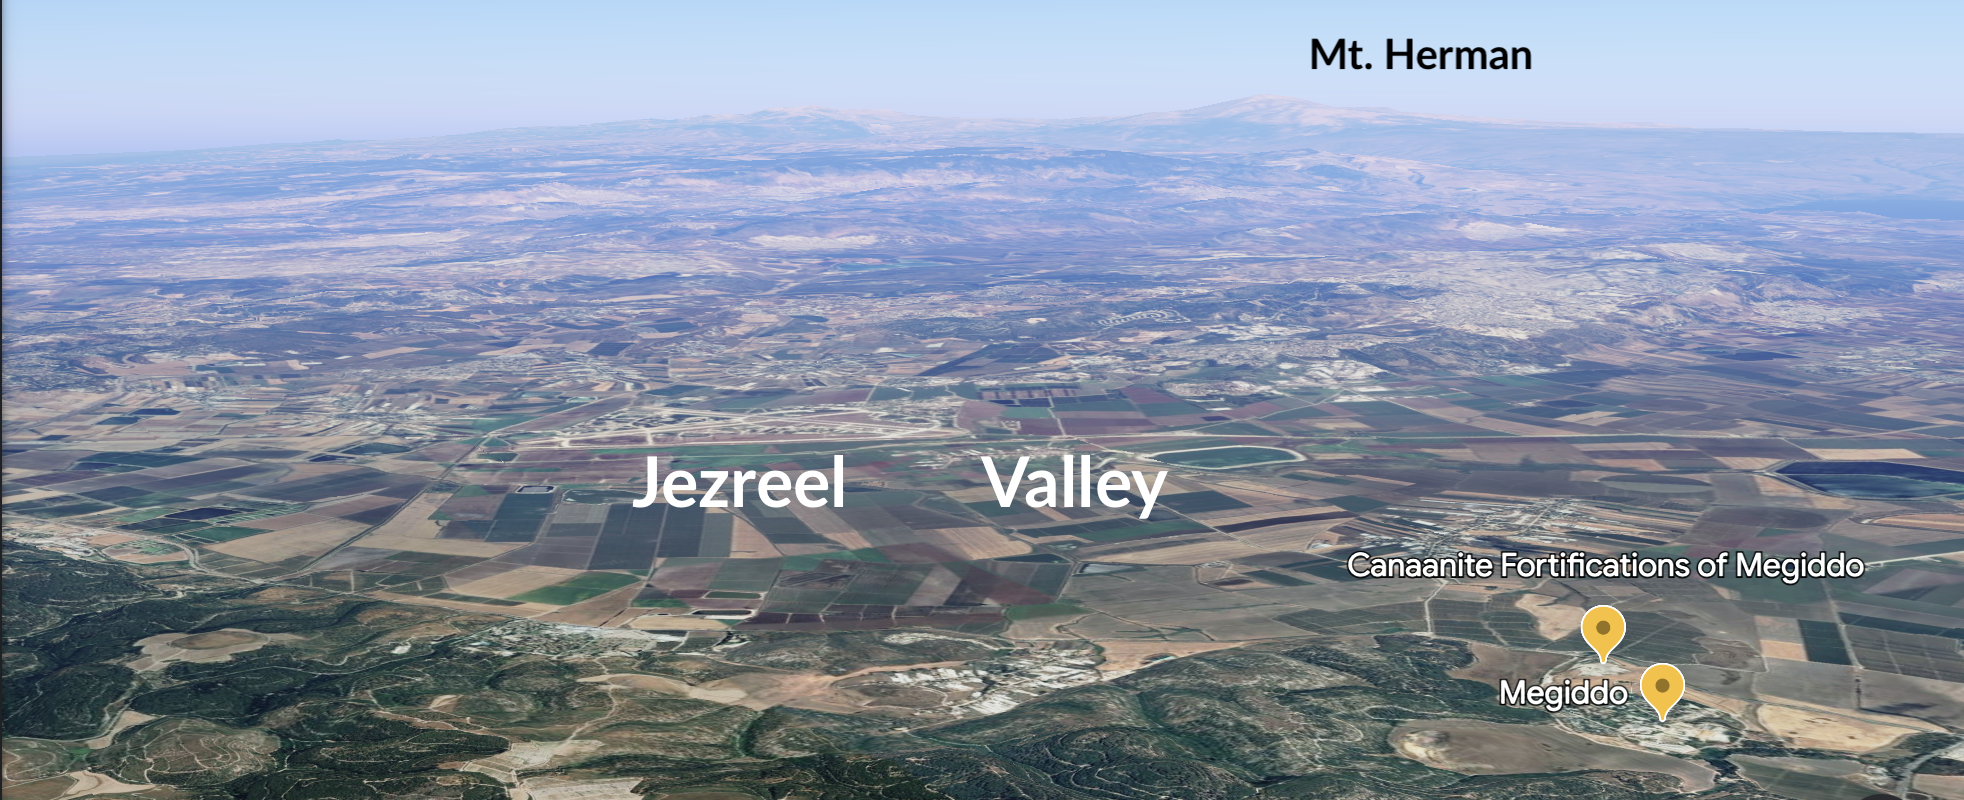 The Jezreel Valley from Megiddo, with Mt. Herman towering in the background.